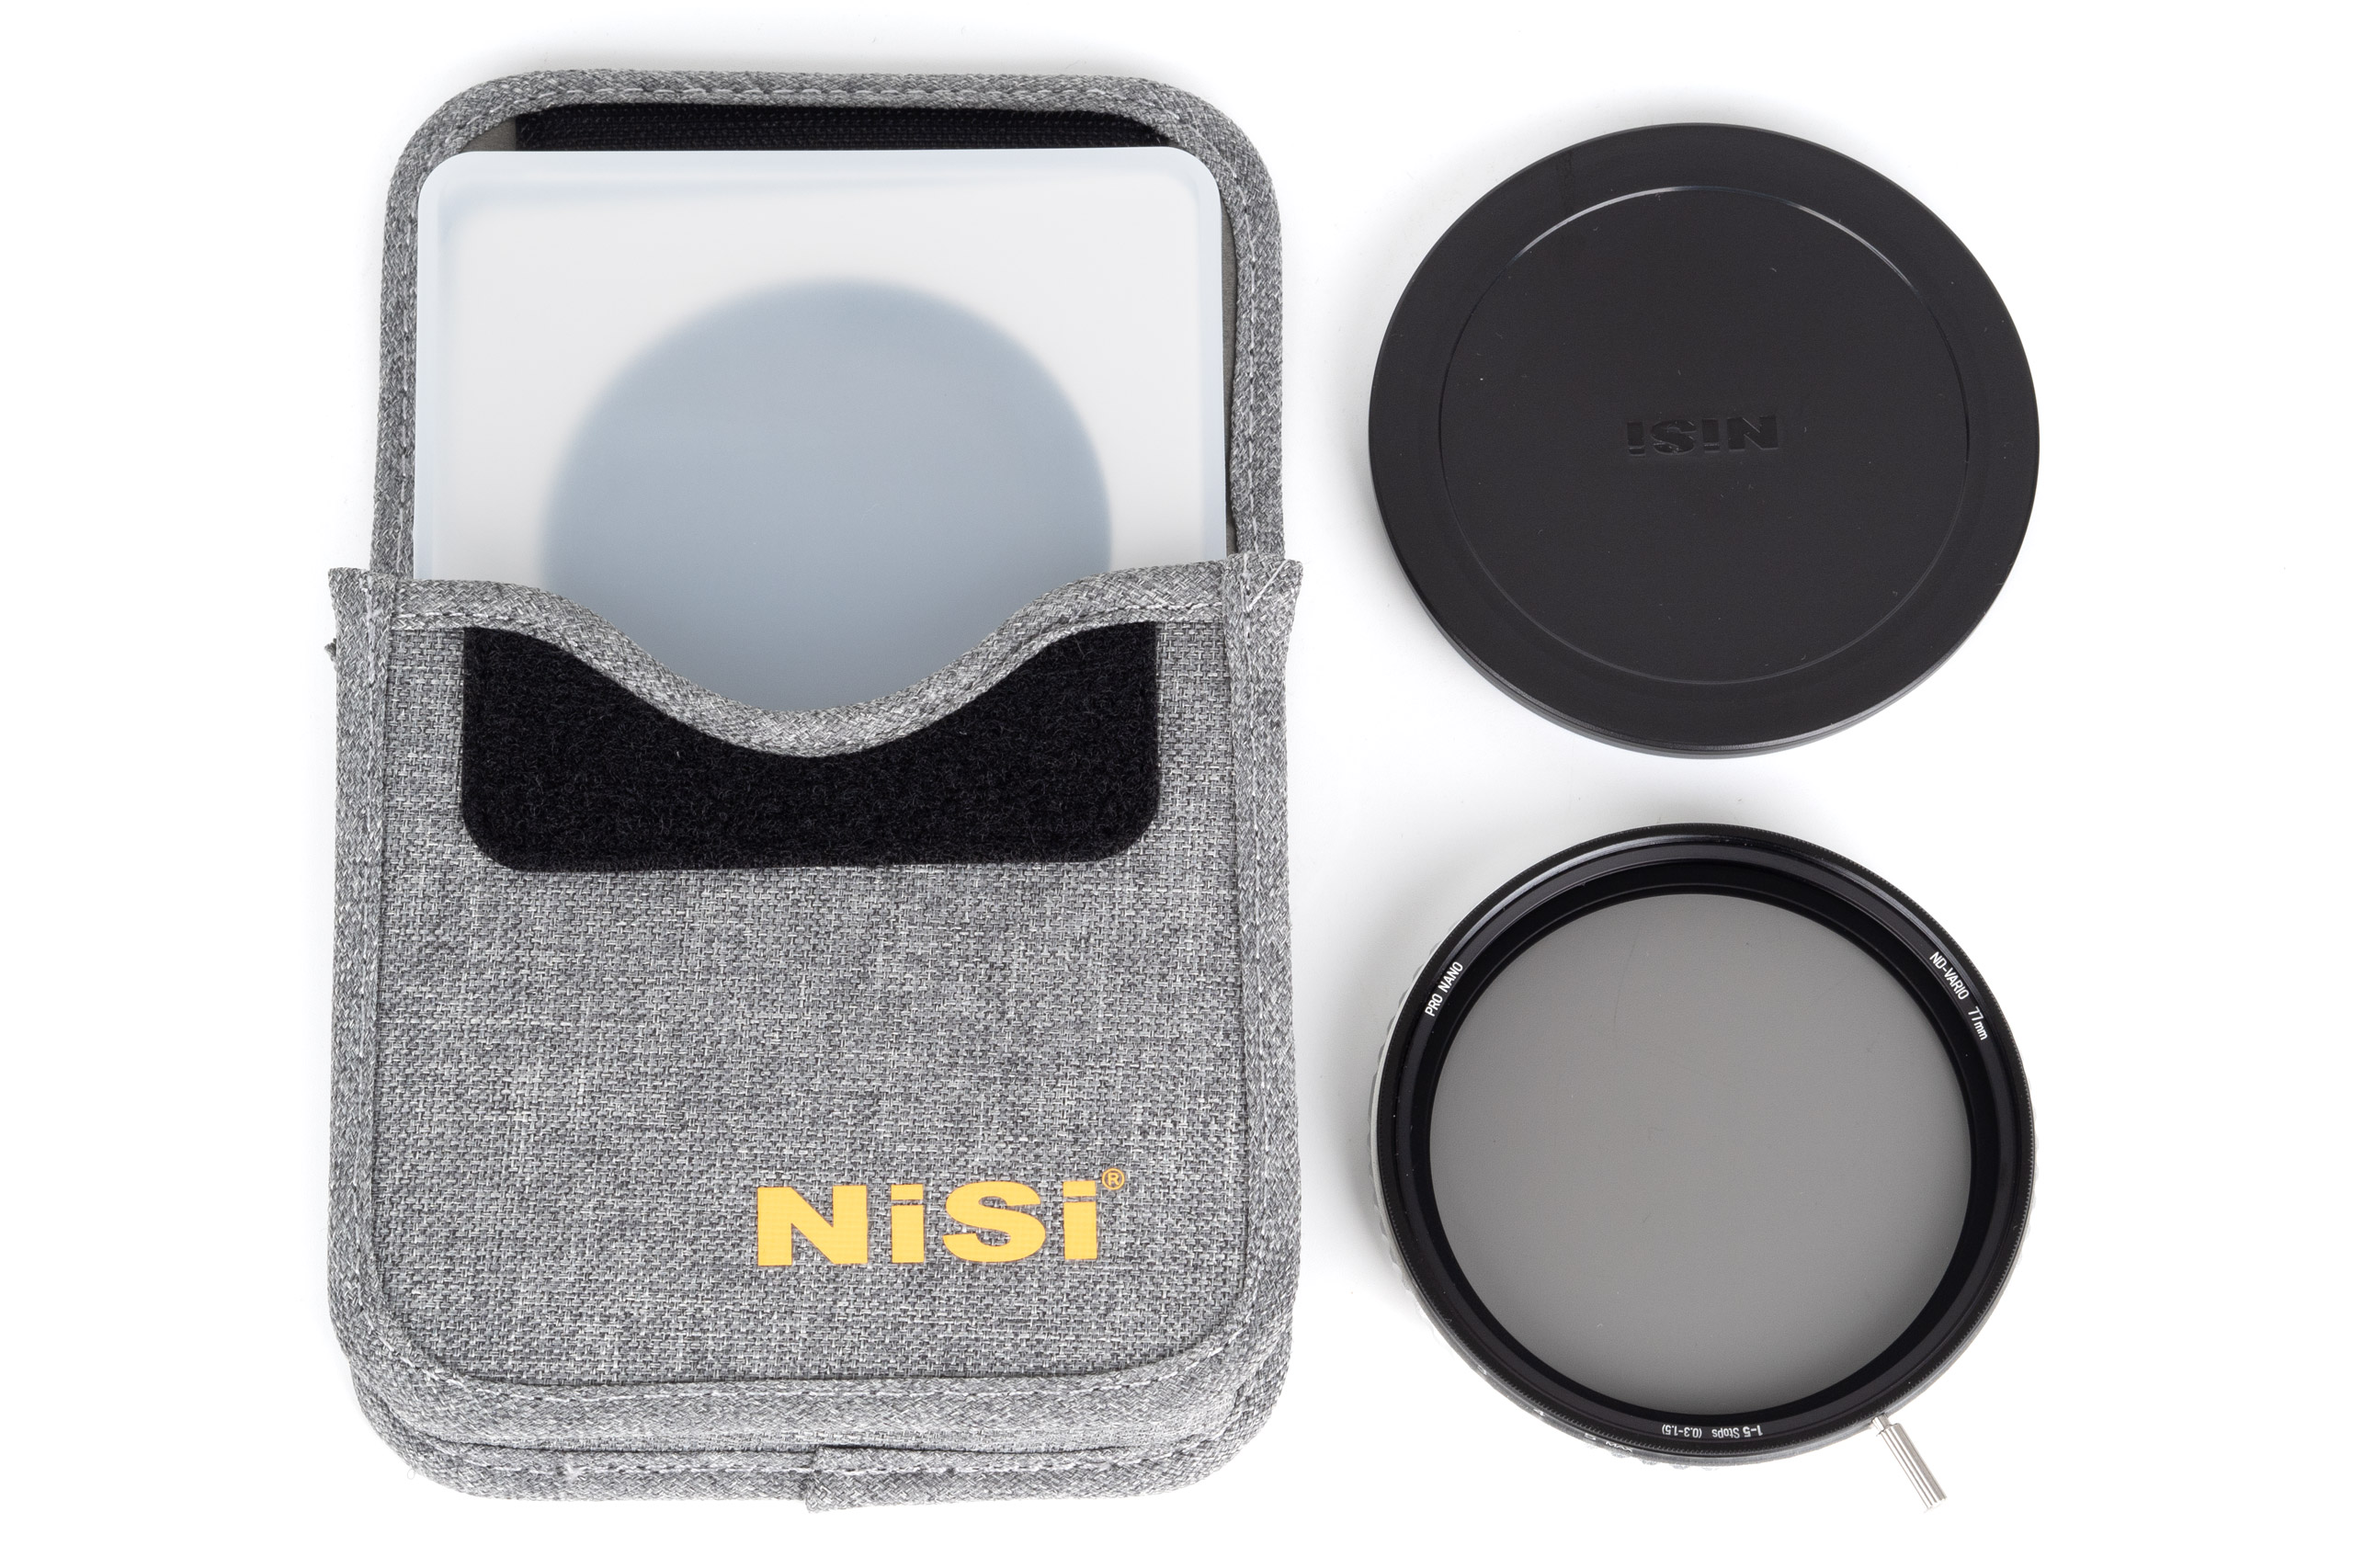 NiSi True Color ND-Vario 1-5 stops kit contents